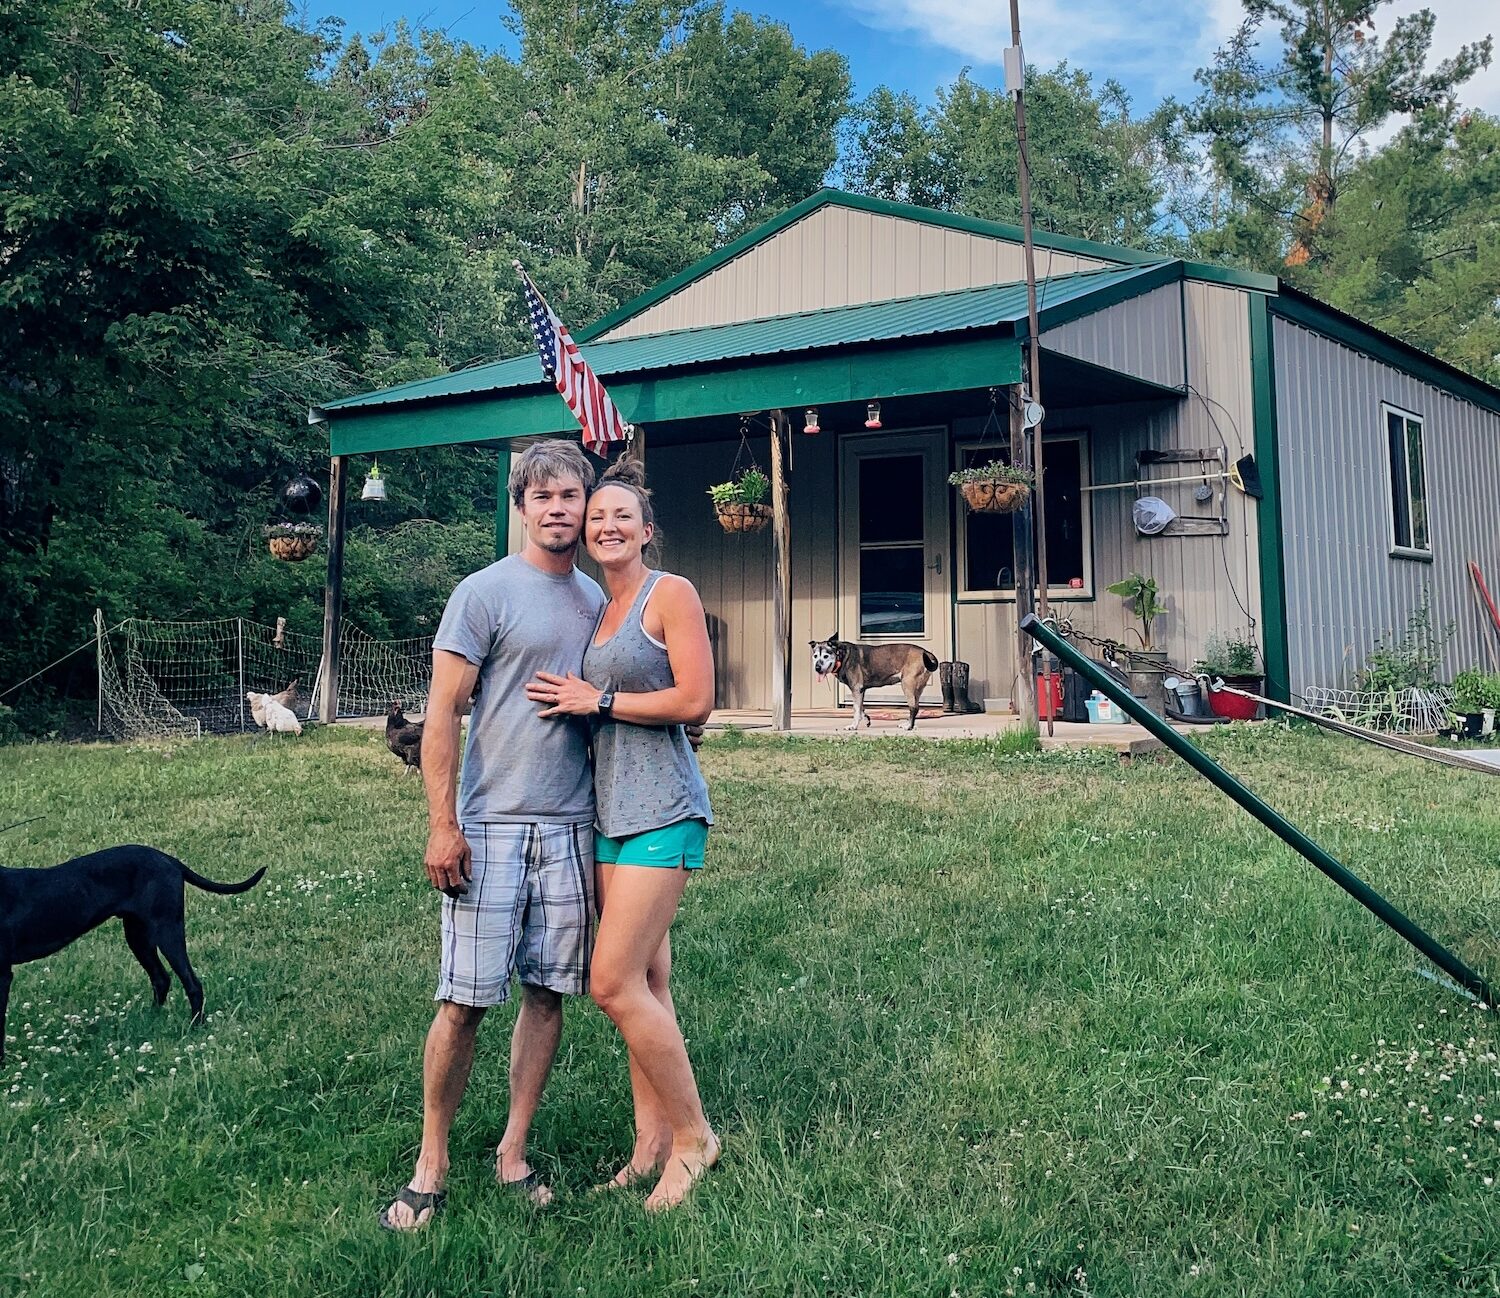 A phot of Ryan and I in front of our cabin on our homestead